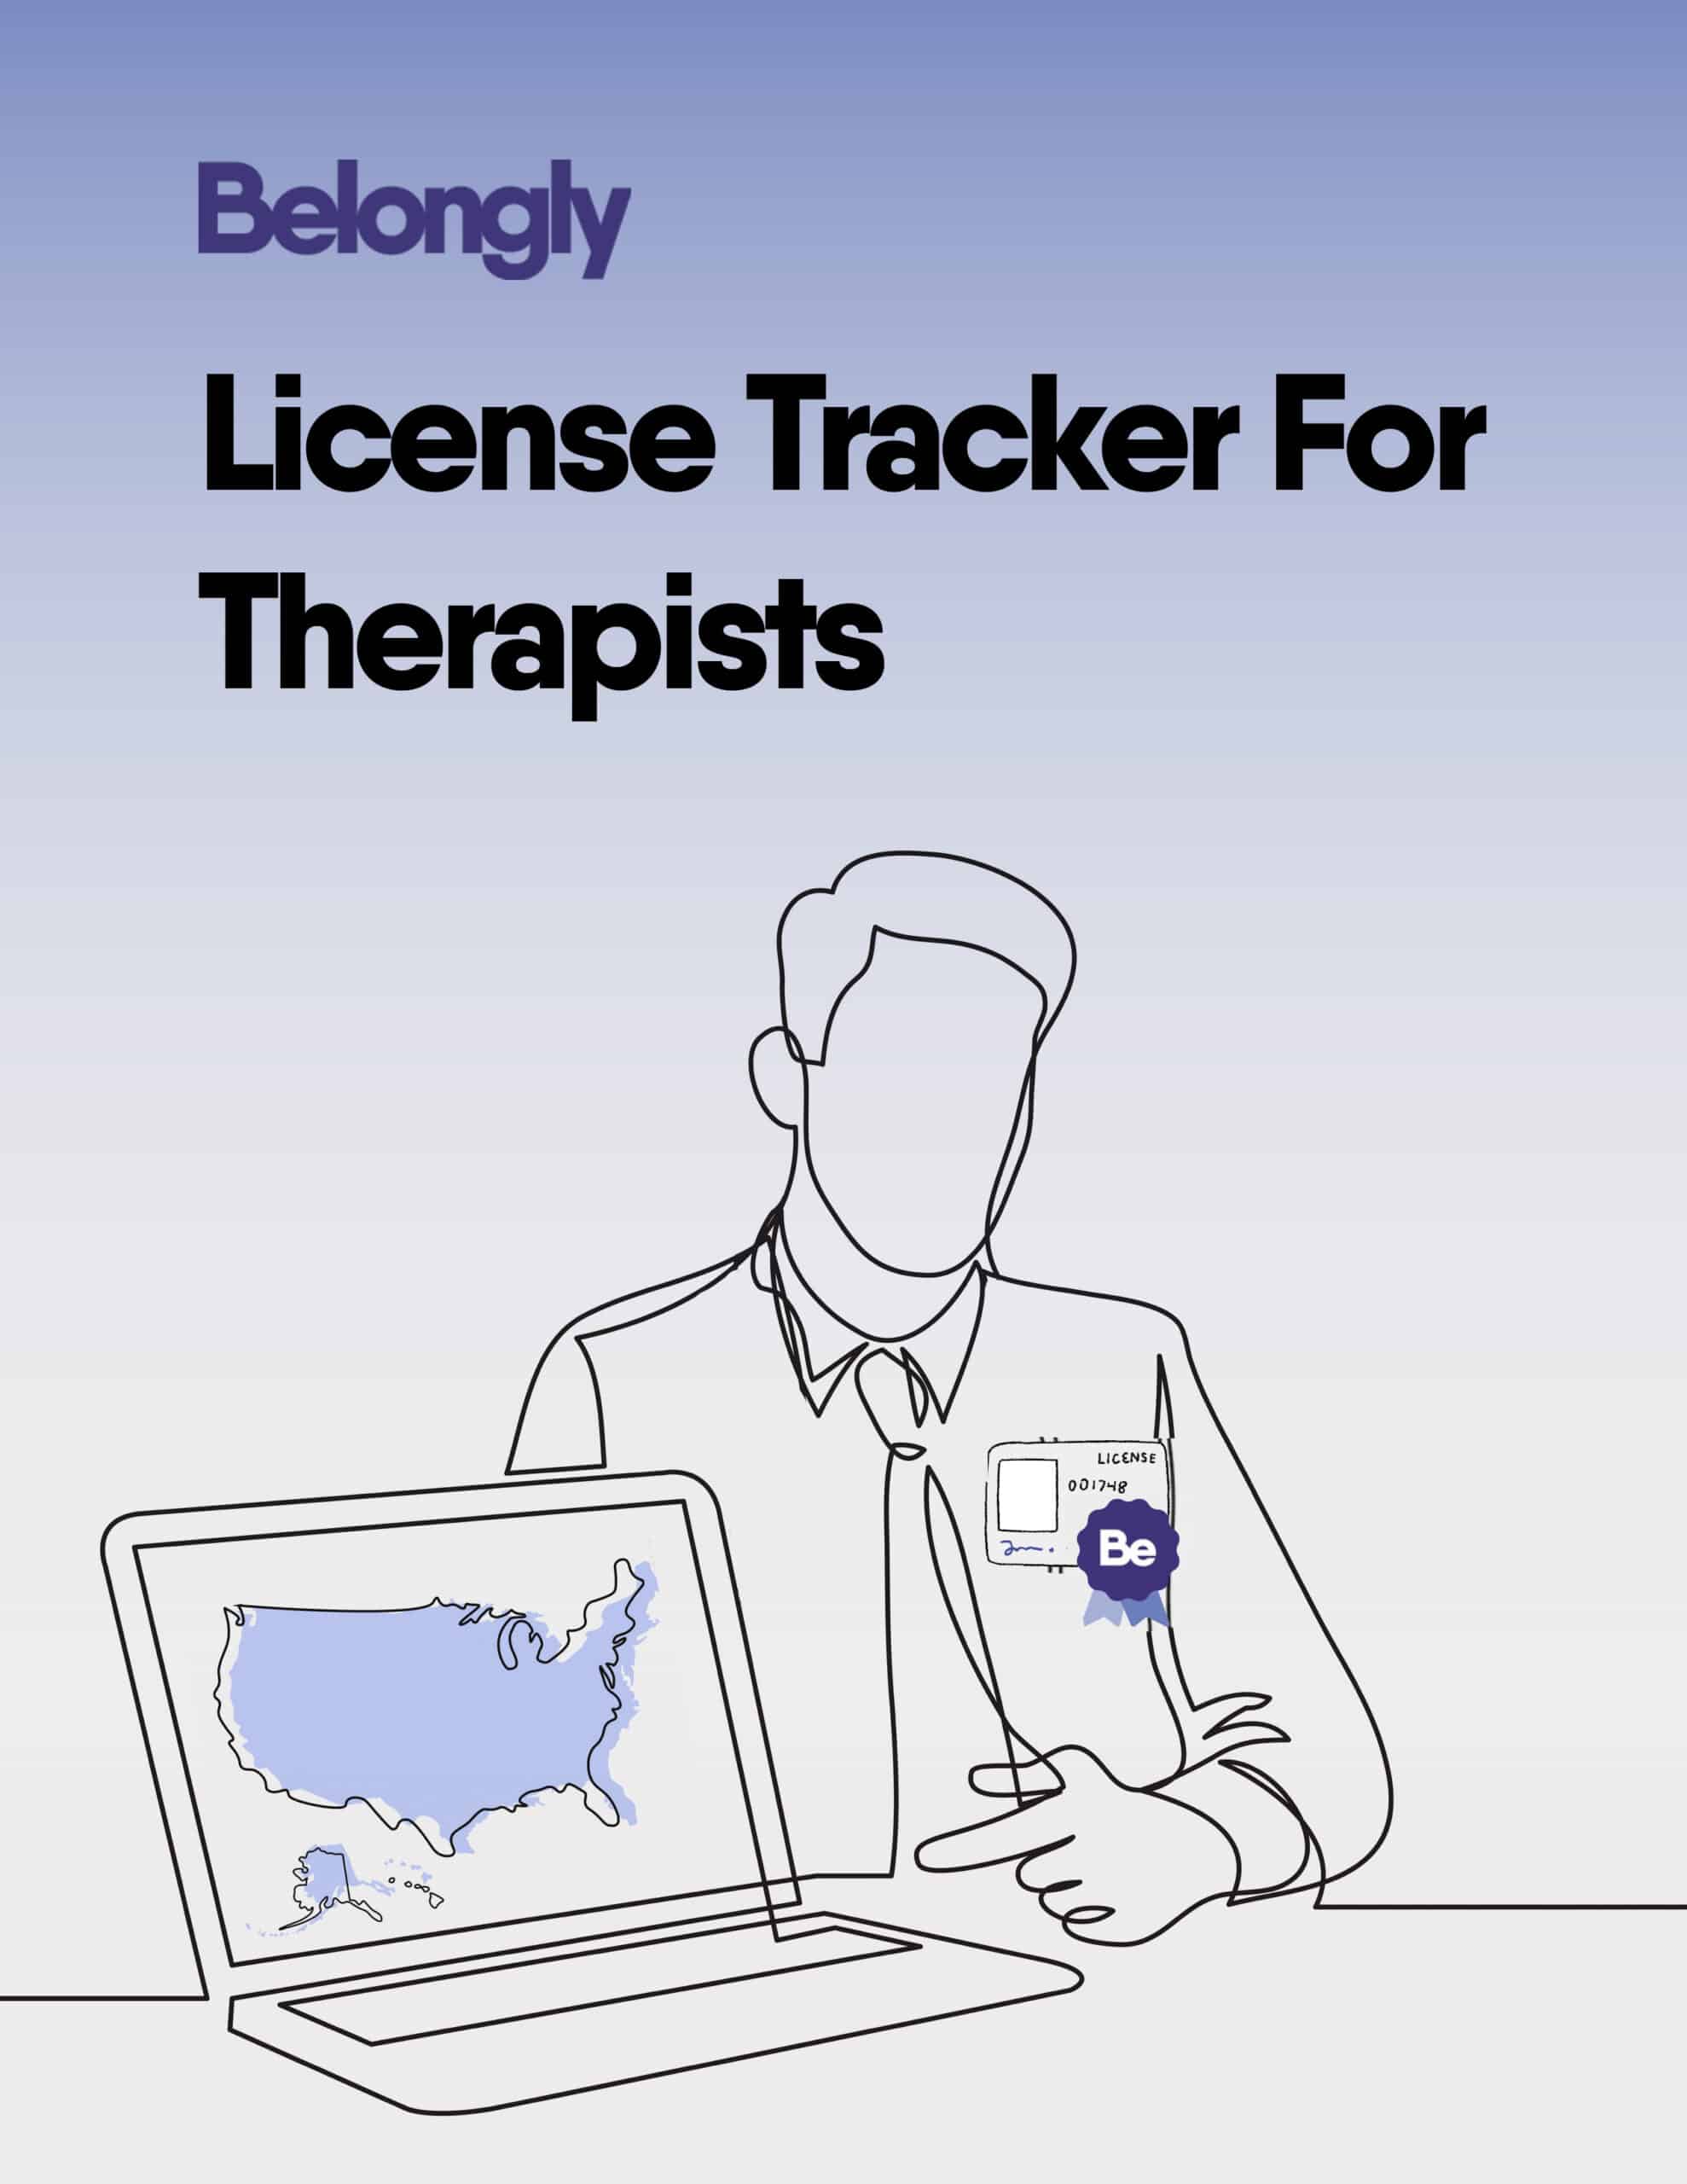 License Tracker For Therapists